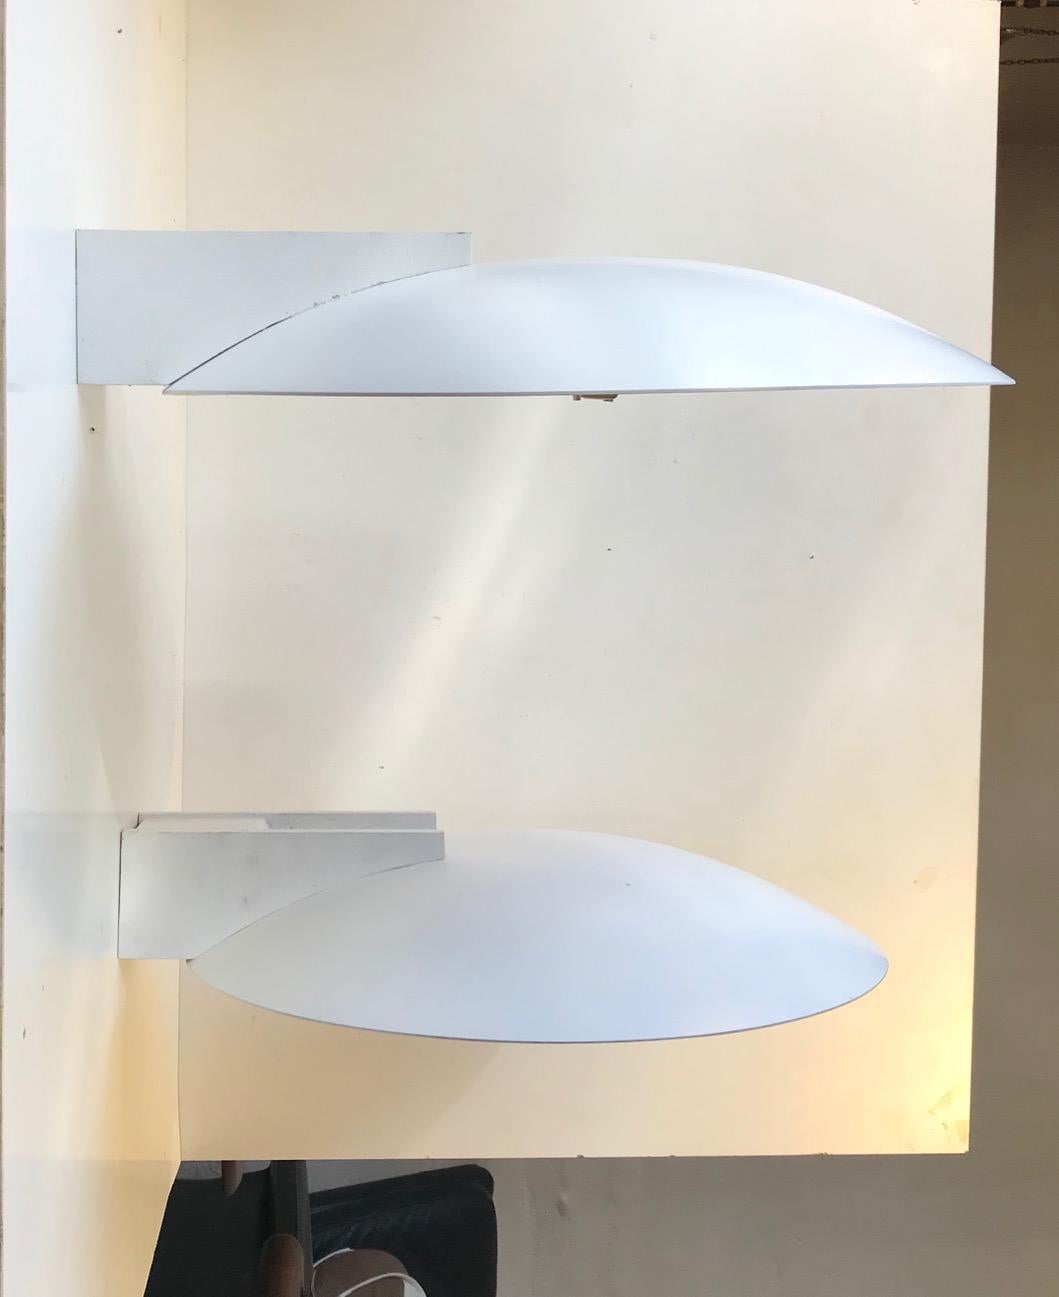 A pair of fixed wall lights designed and manufactured by Pierre Disderot Paris during the 1980s. These are up light sconces that projects the light towards the ceiling creating an ambient and cosy lighting in the room. They can easily be used as